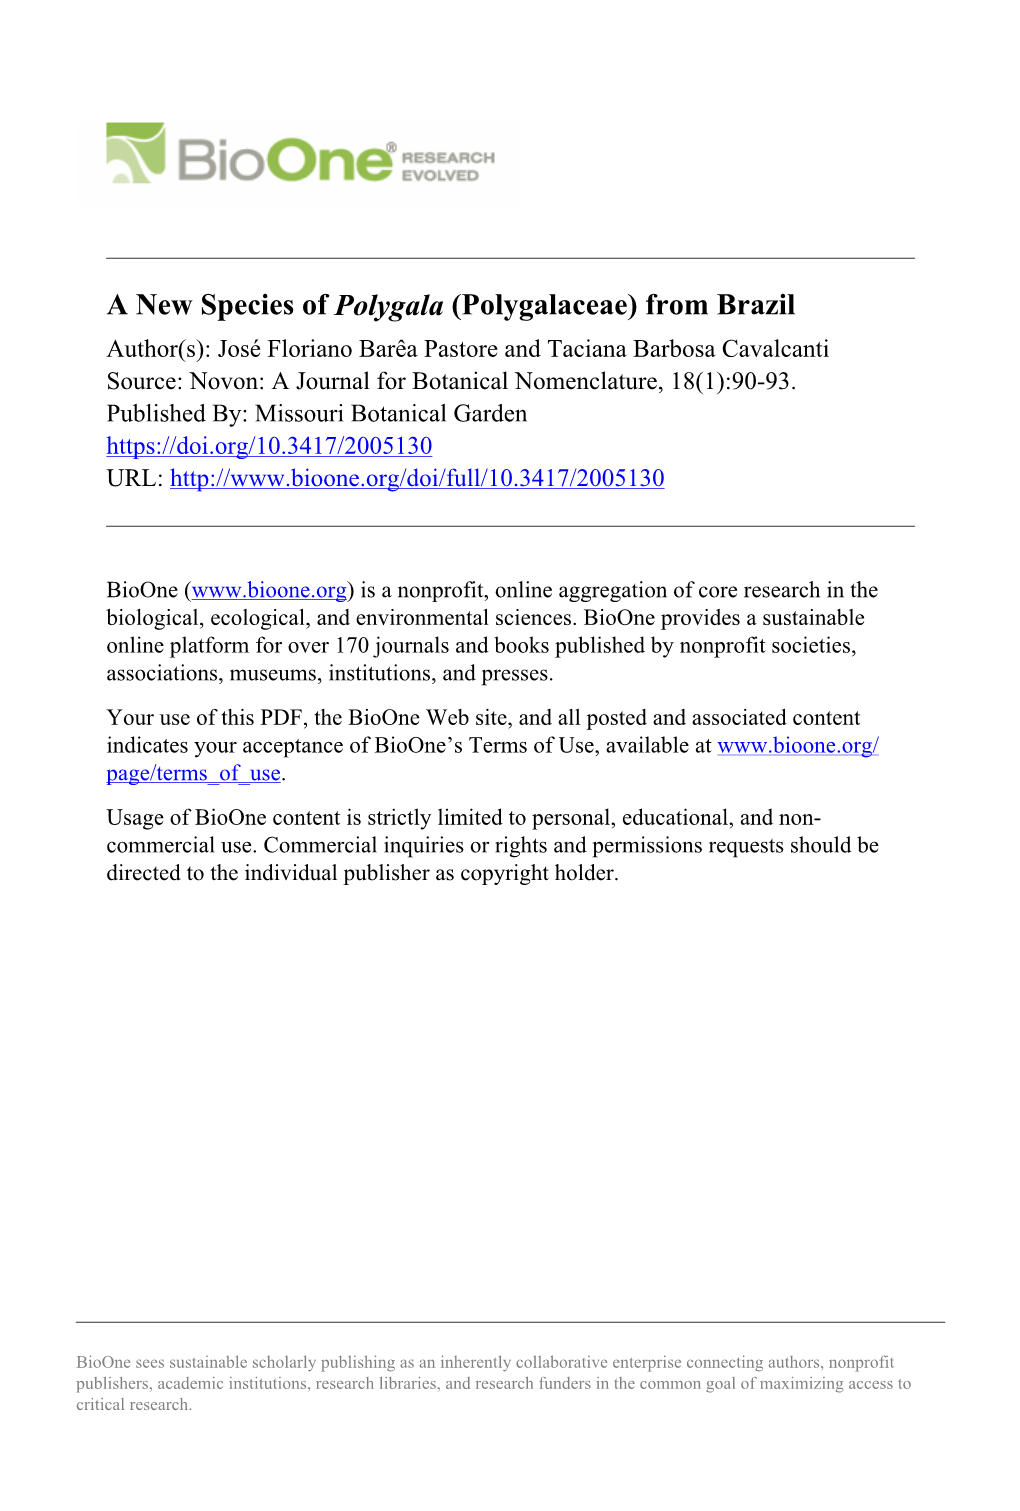 A New Species of Polygala (Polygalaceae) from Brazil